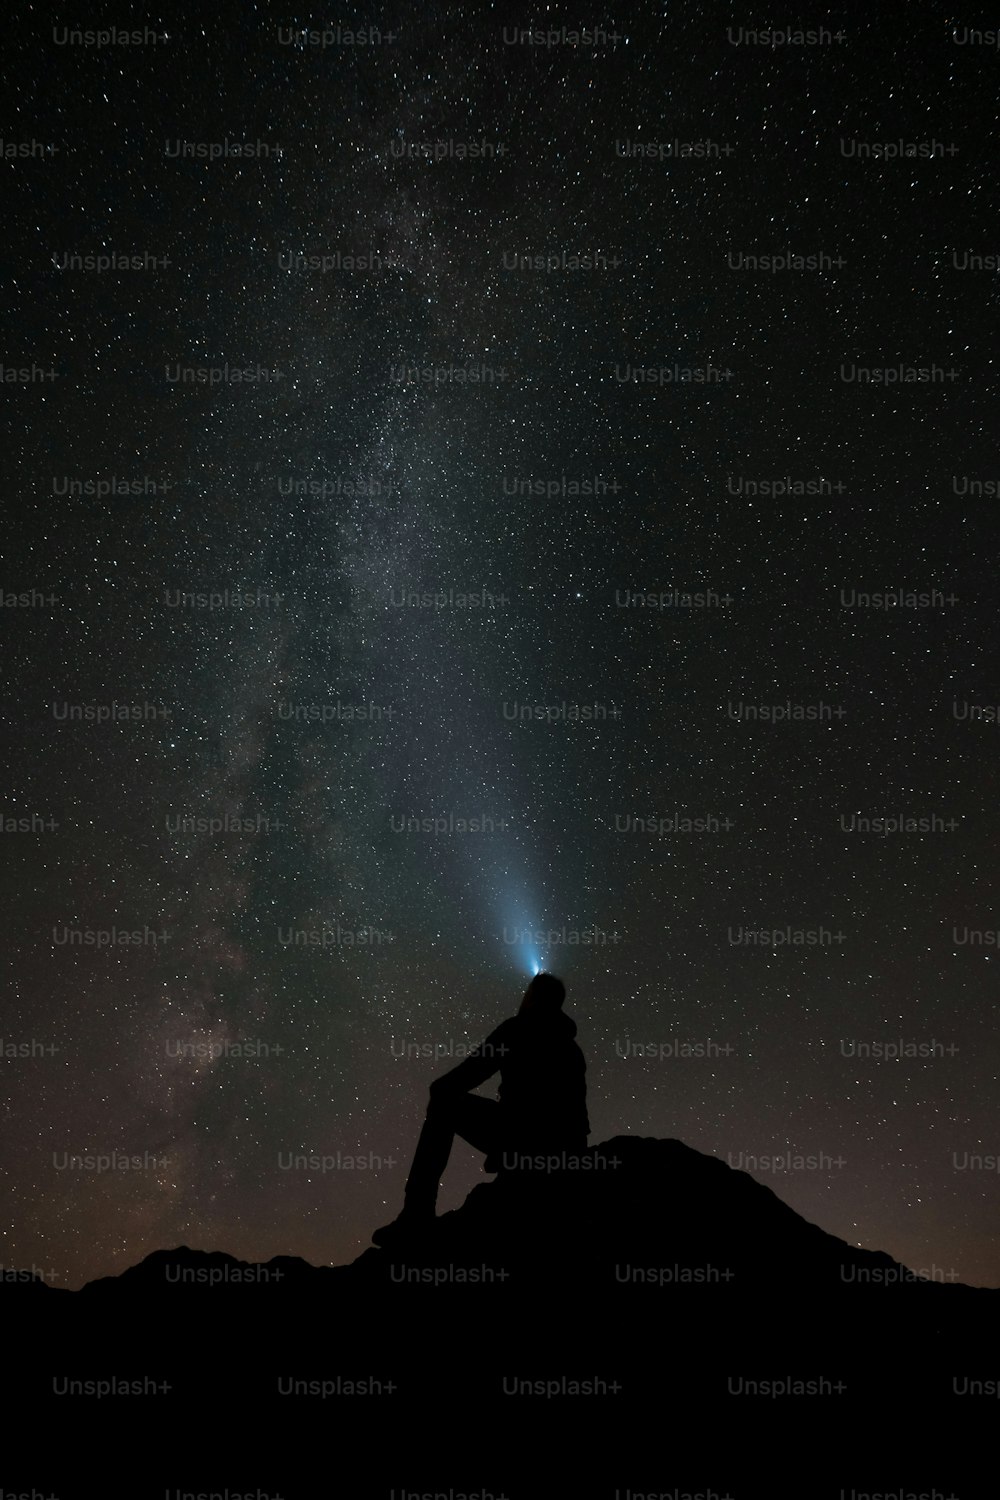 a man sitting on top of a hill under a night sky filled with stars